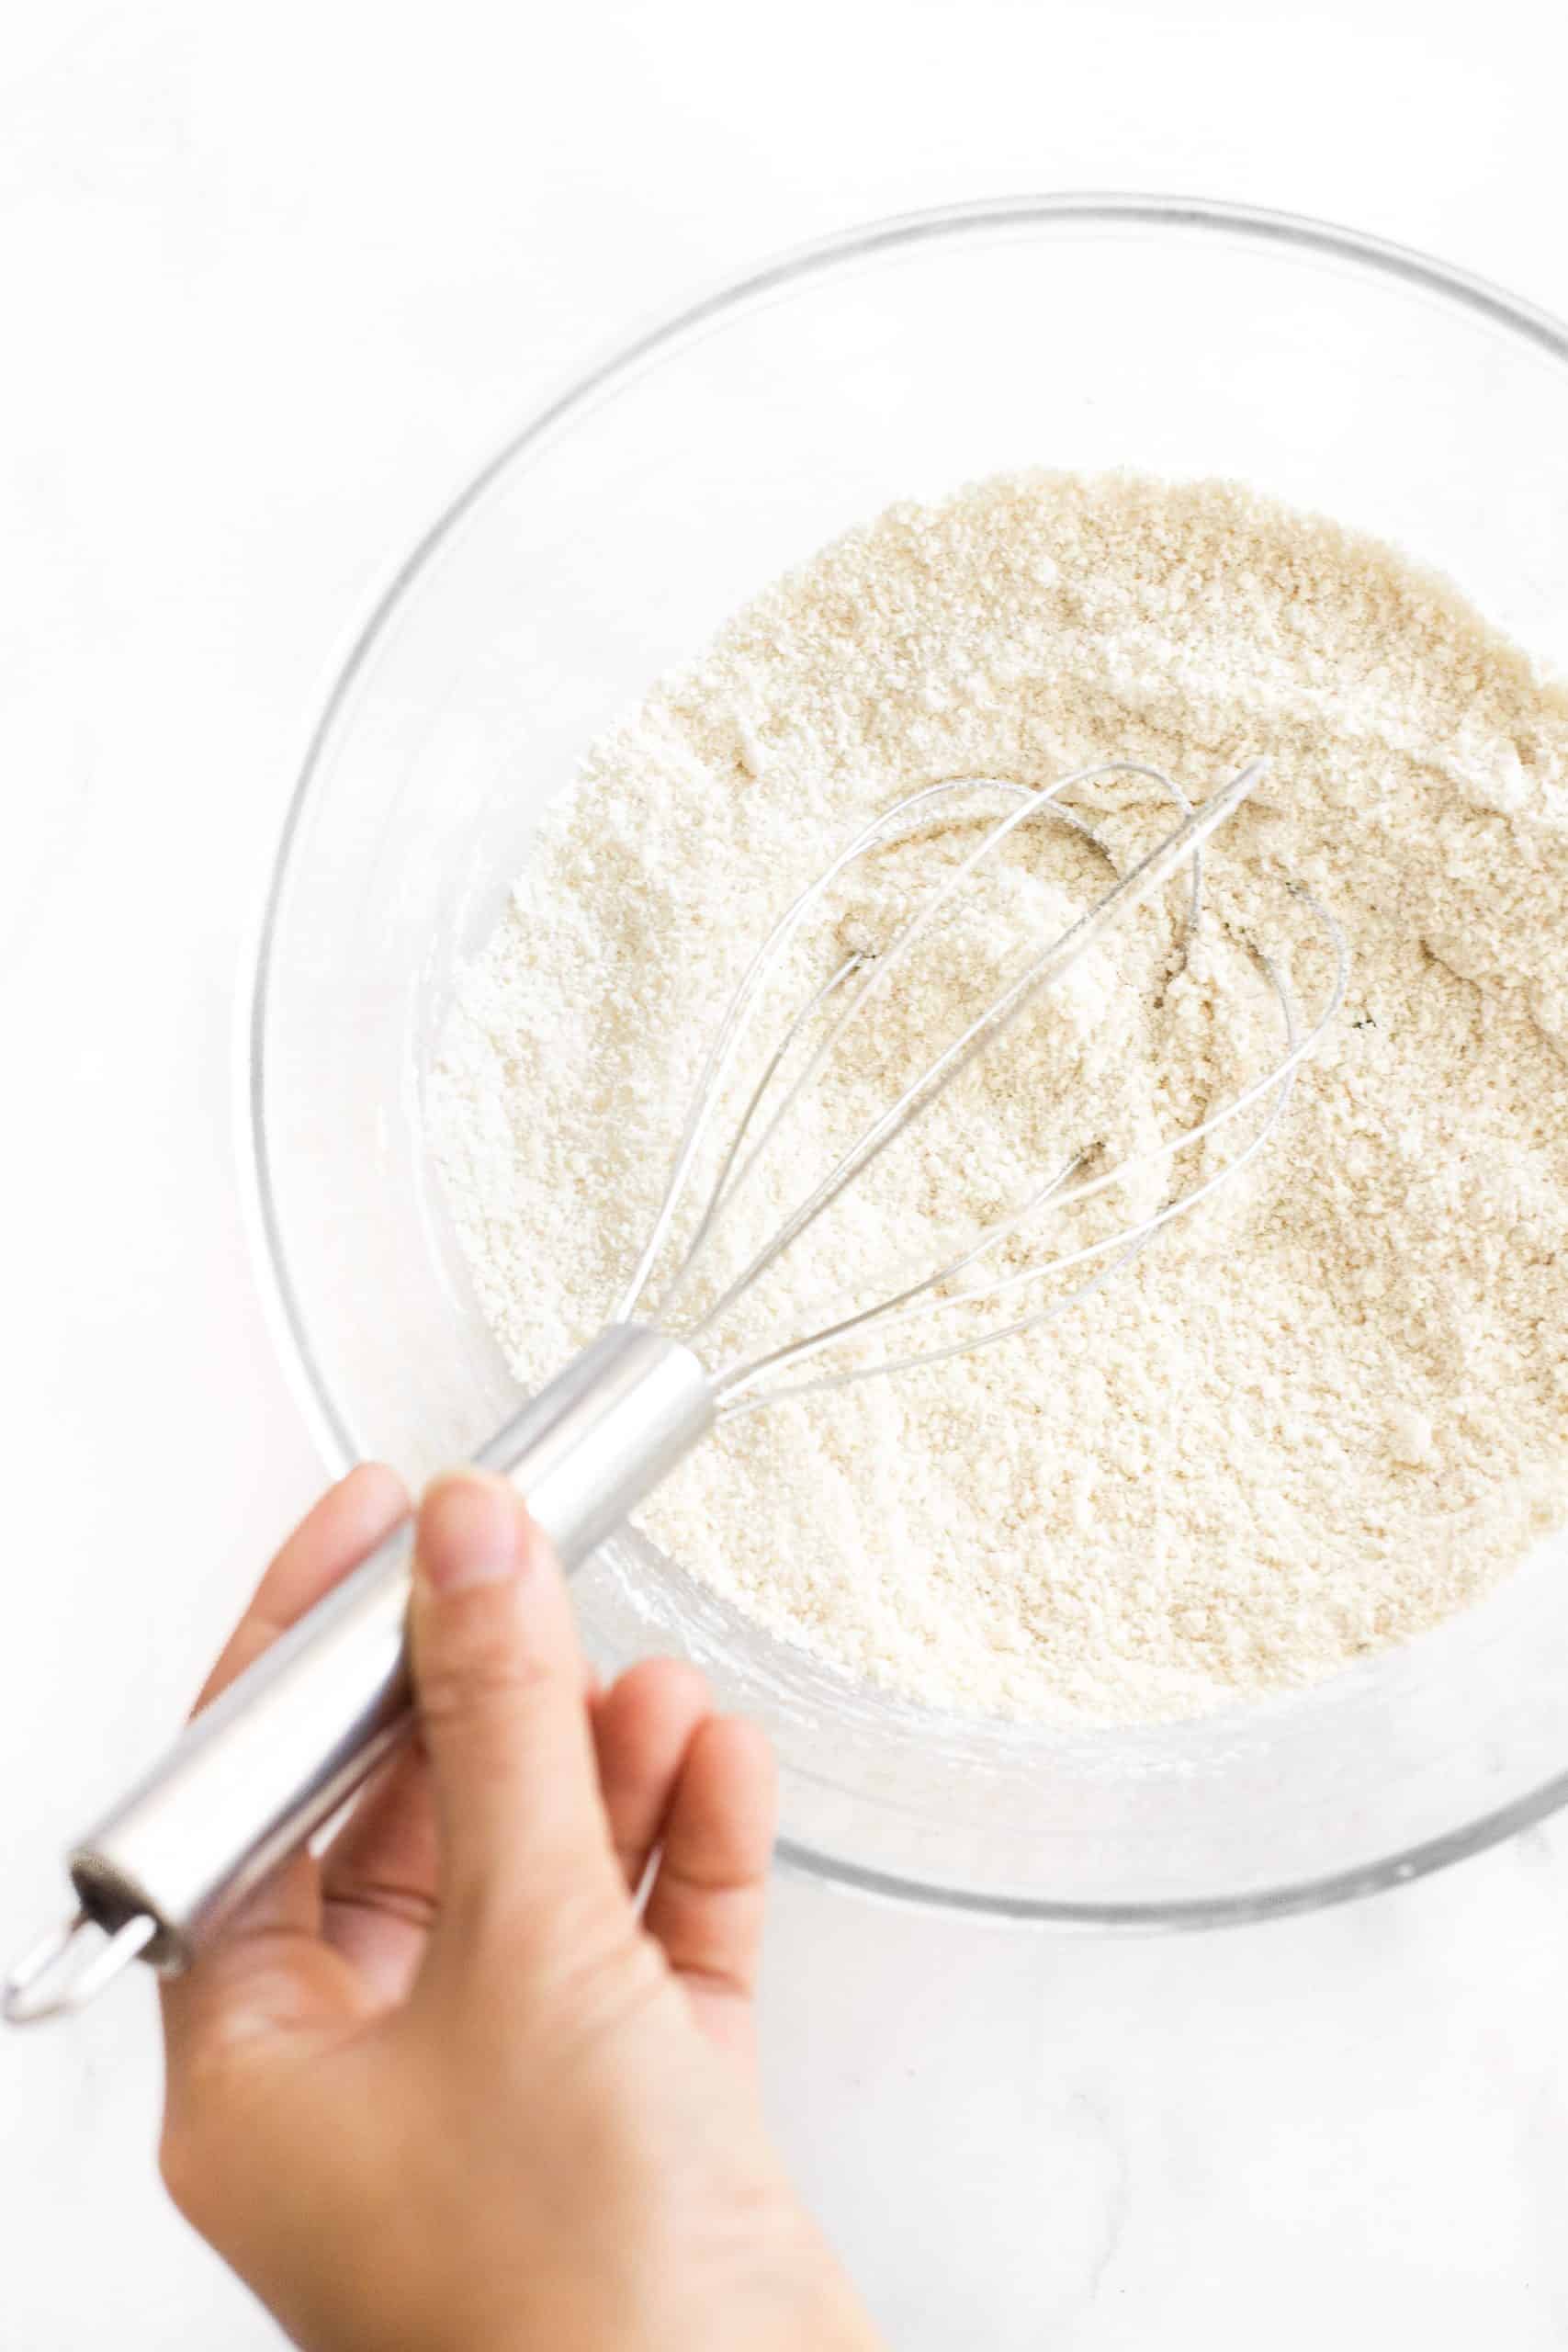 Whisking flour in a glass mixing bowl.